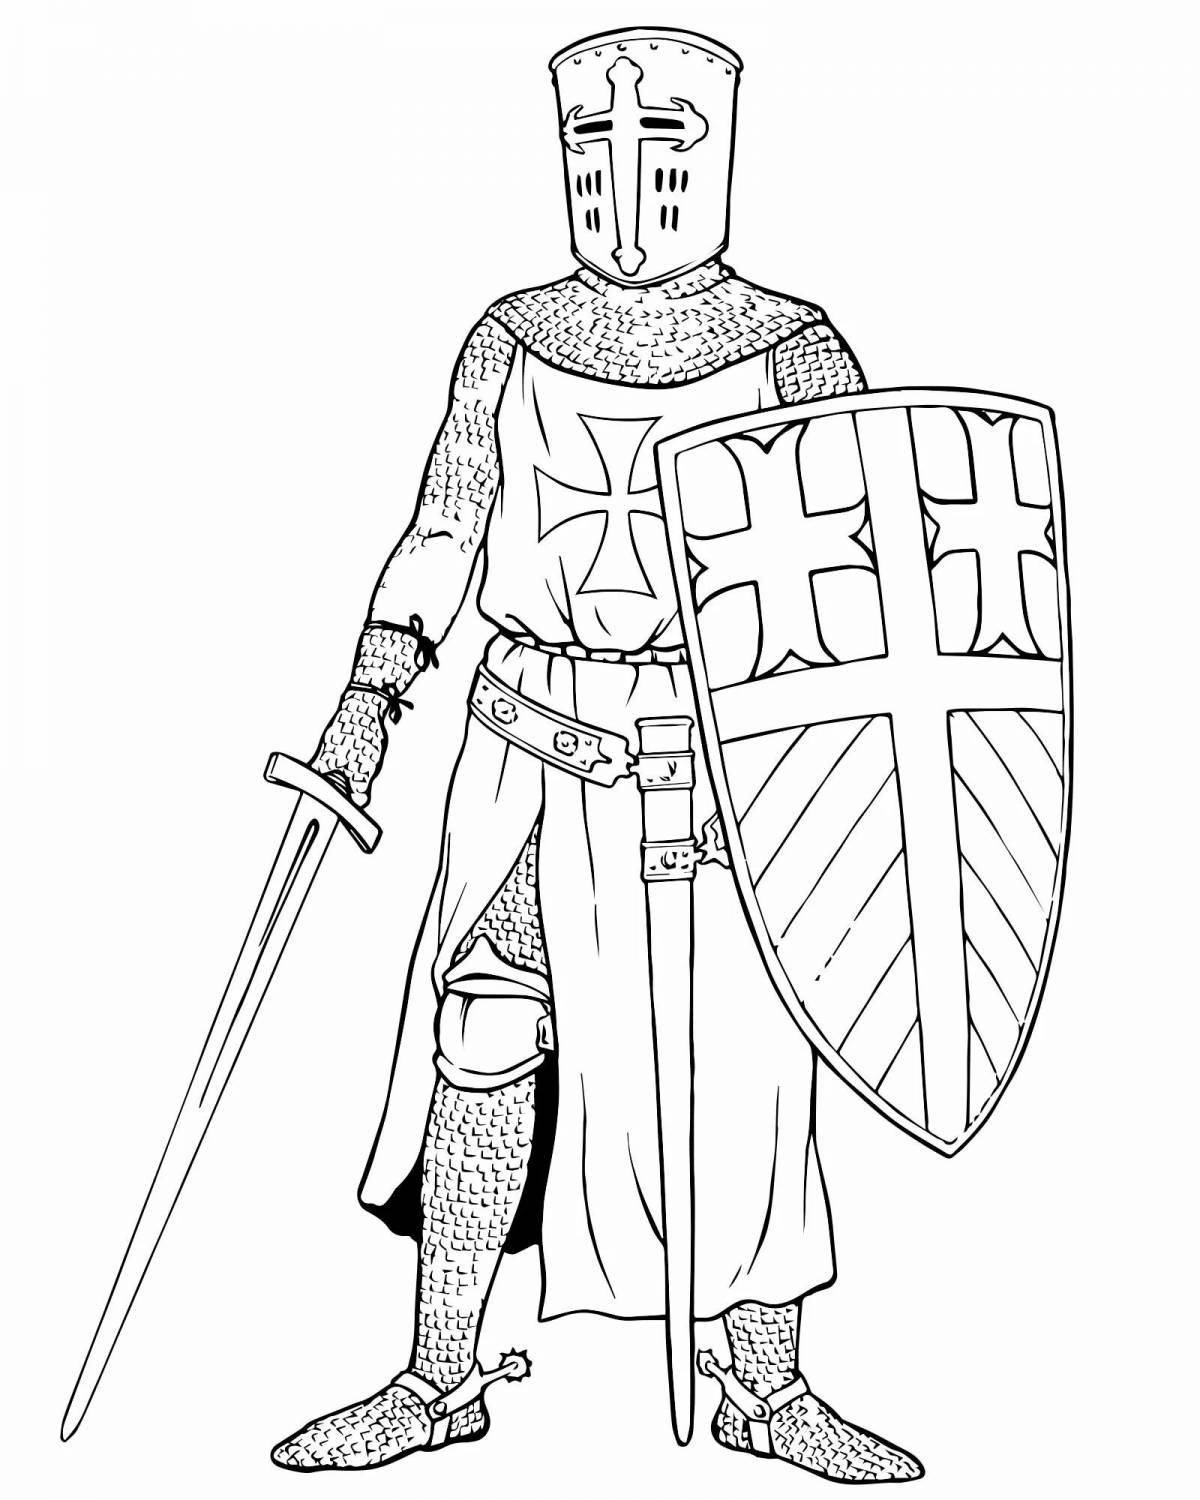 Crusaders shameless coloring pages